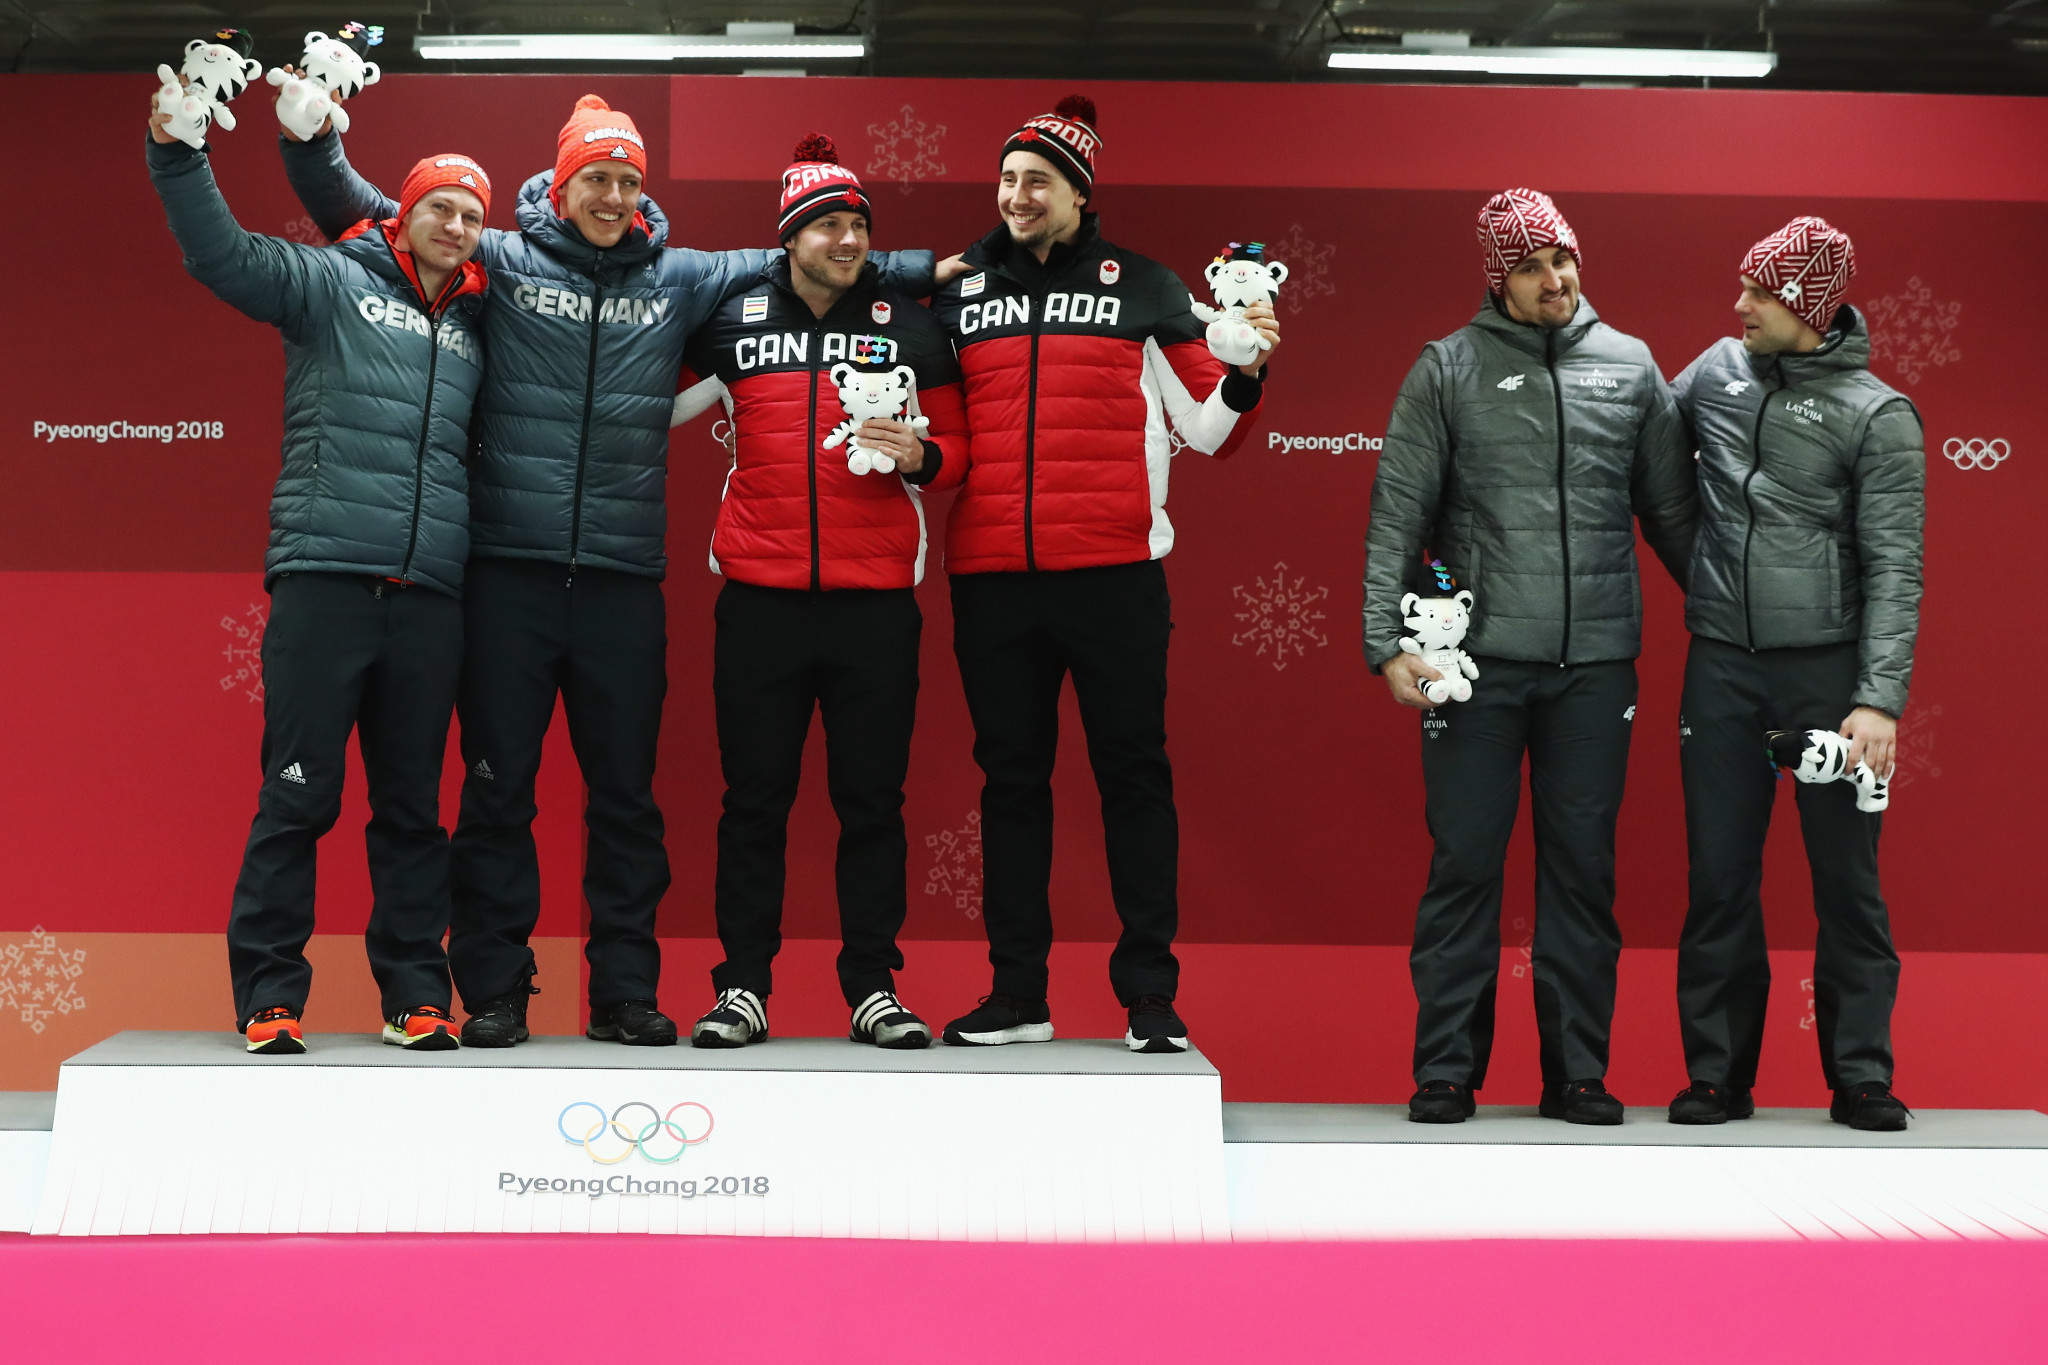 Canada and Germany share gold medal at Pyeongchang 2018 in dramatic two-man bobsleigh event